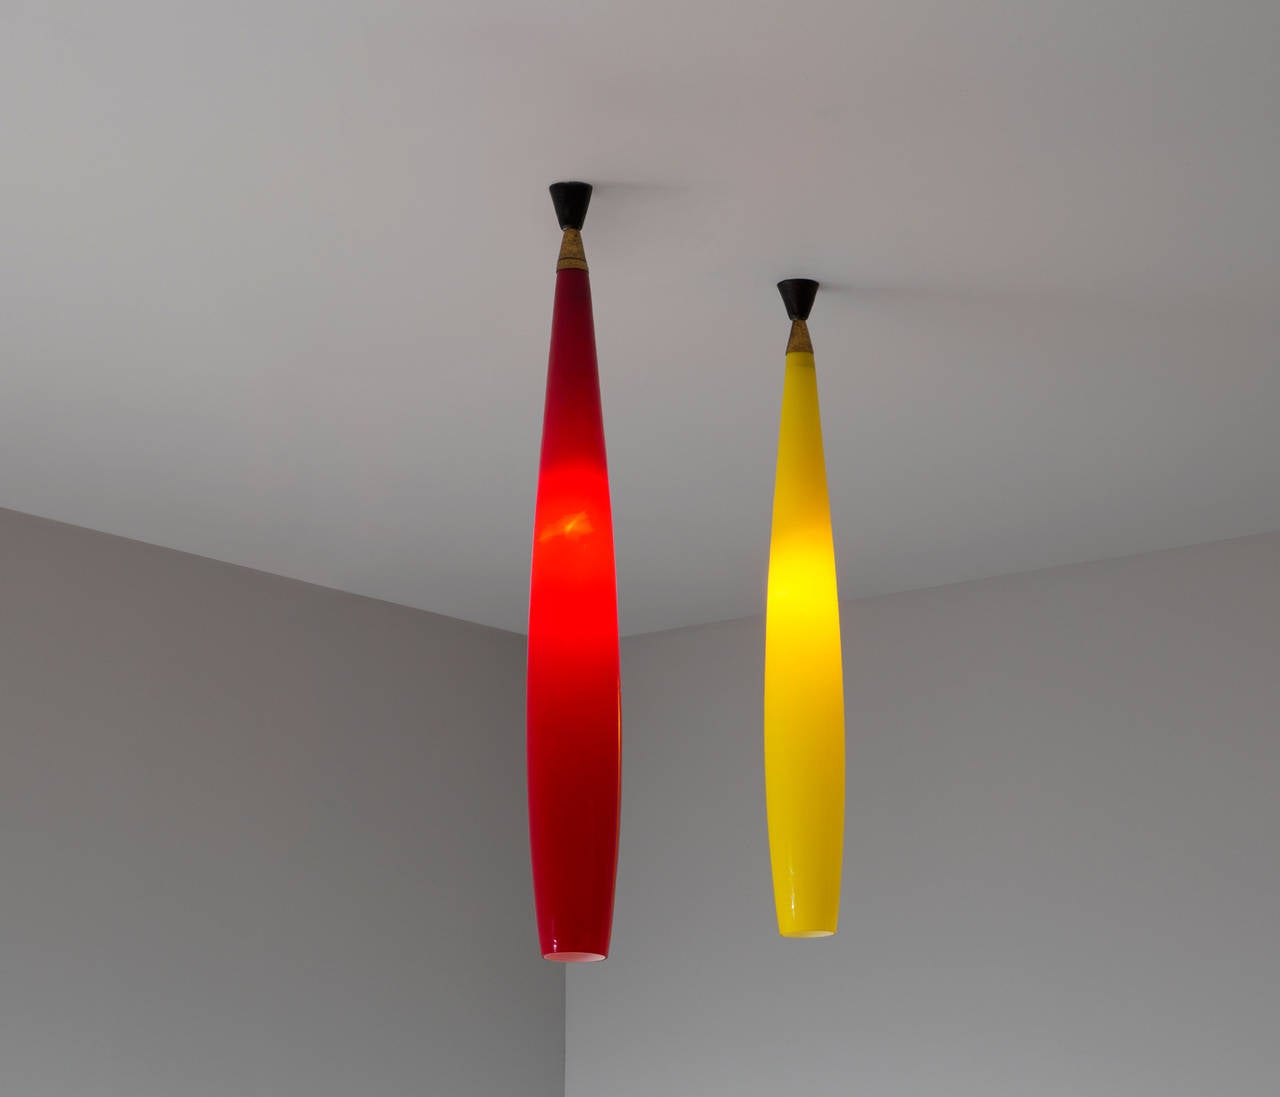 Pair of two very long - 40 inch pendants by Alessandro Pianon for Vistosi Murano.

Stunning pair of blown glass pendants designed by Alessandro Pianon for Vistosi Murano in 1960 with beautiful brass details. These pendants creates a beautiful